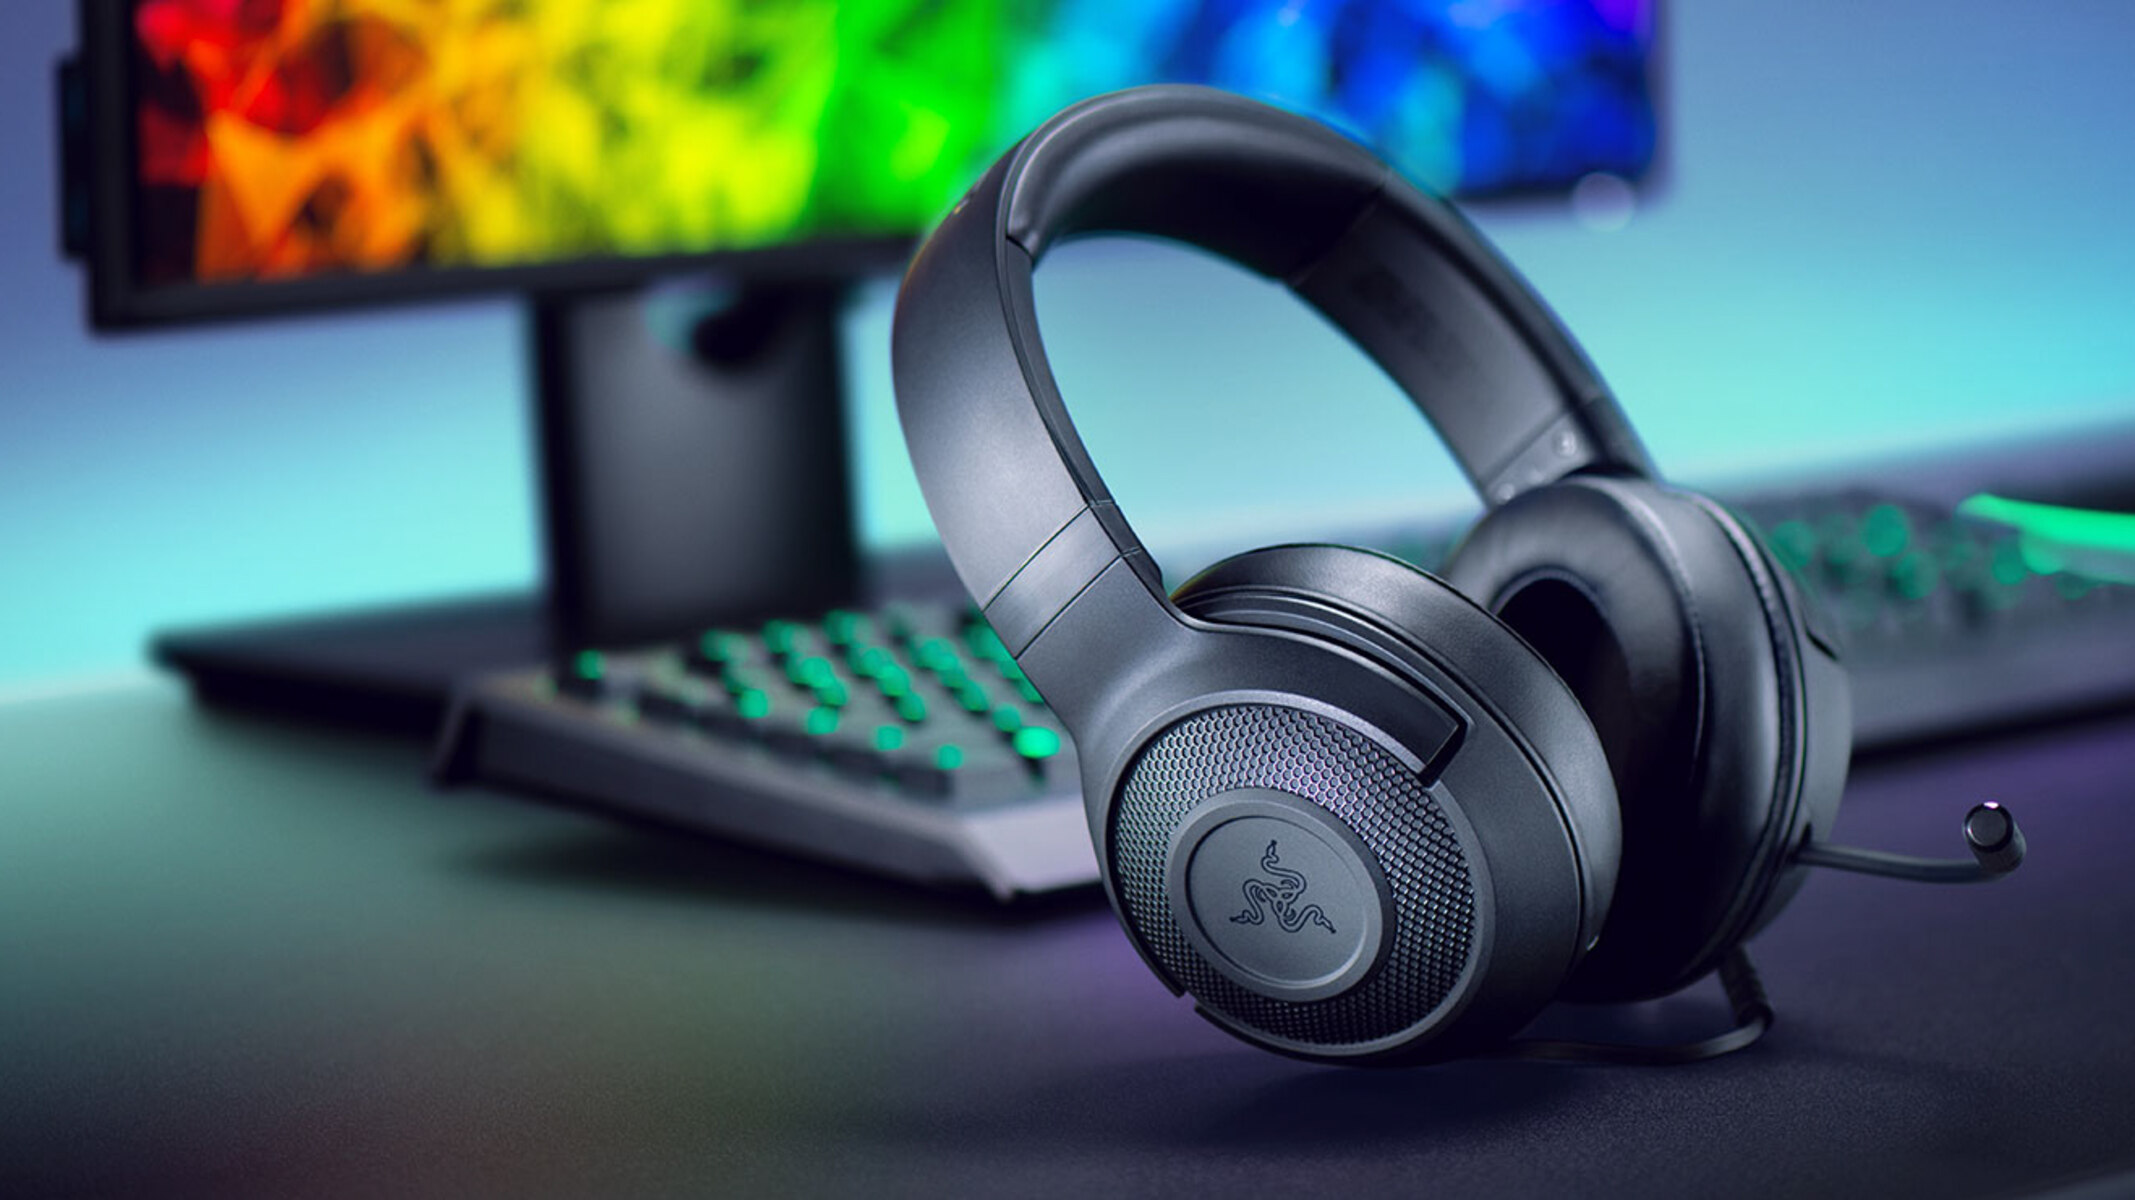 What Is Voice Monitoring On A Gaming Headset?